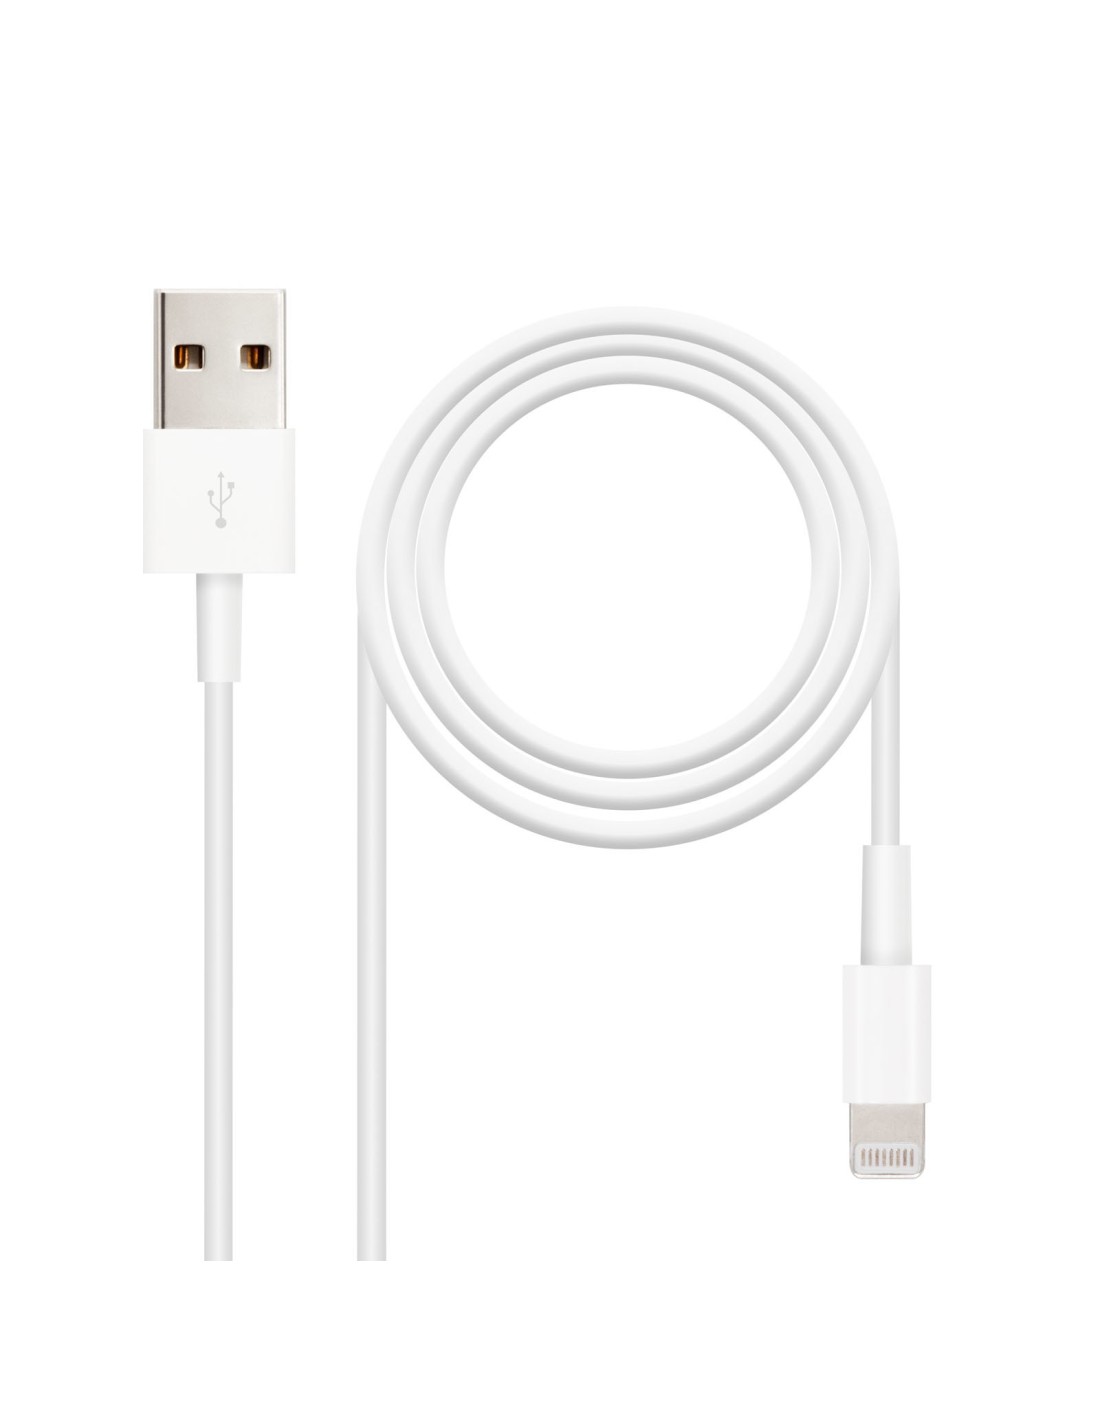 Nanocable CABLE LIGHTNING IPHONE A USB 2.0, IPHONE LIGHTNING-USB A/M, 2.0 M